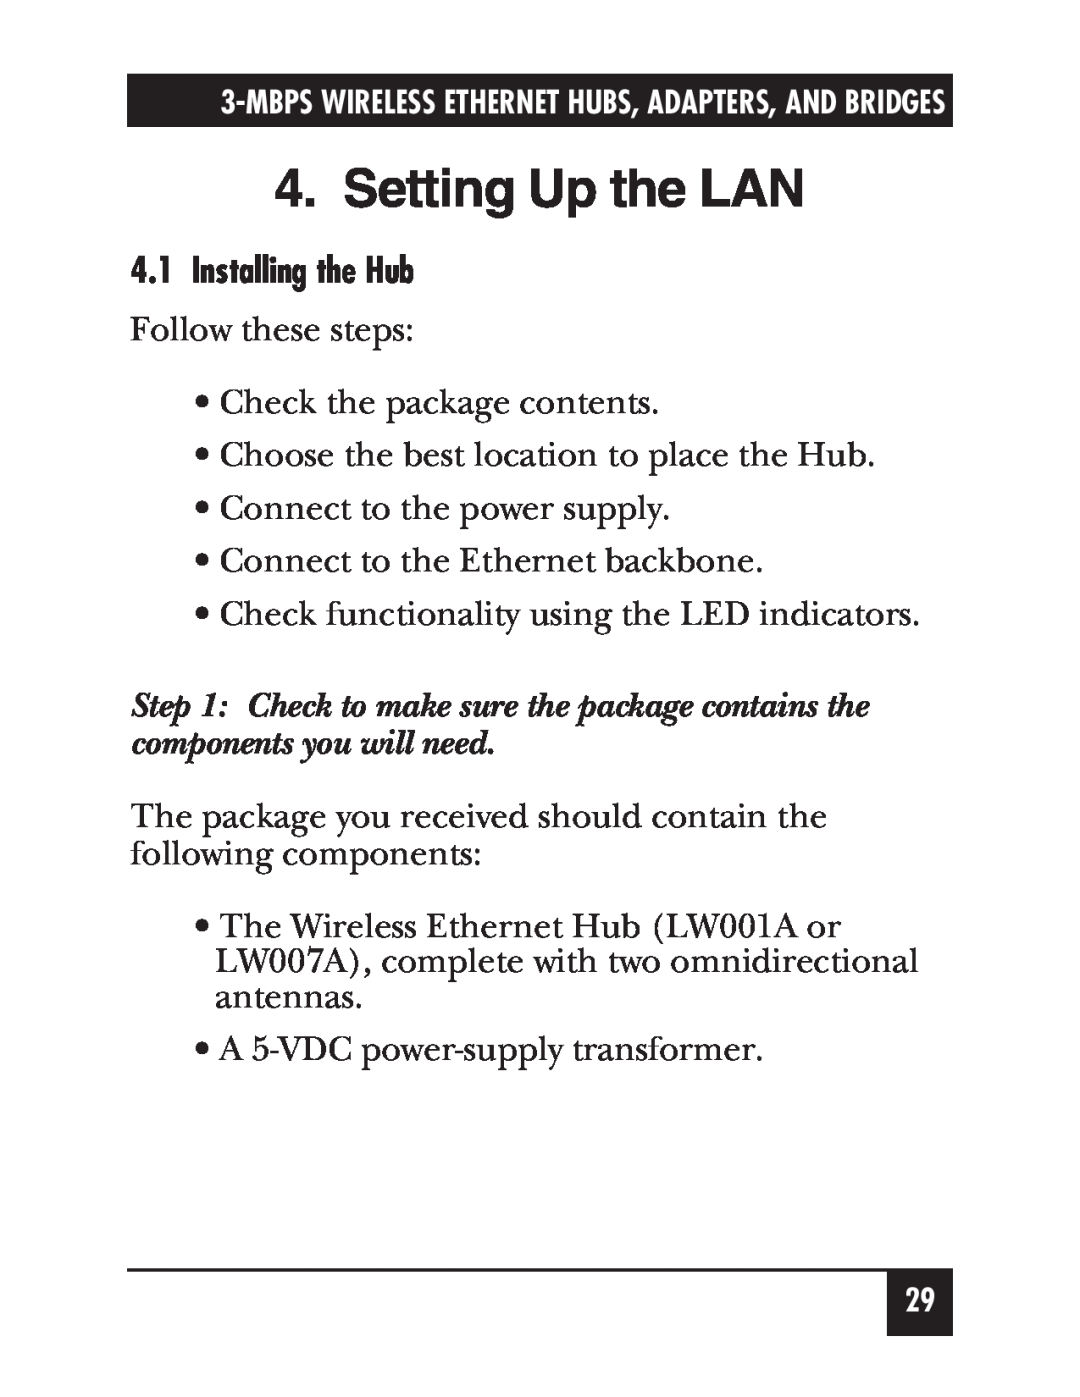 Black Box LW005A, LW012AE, LW011AE, LW008A, LW009A, LW003A, LW002A, LW004A, LW007A manual Setting Up the LAN, Installing the Hub 